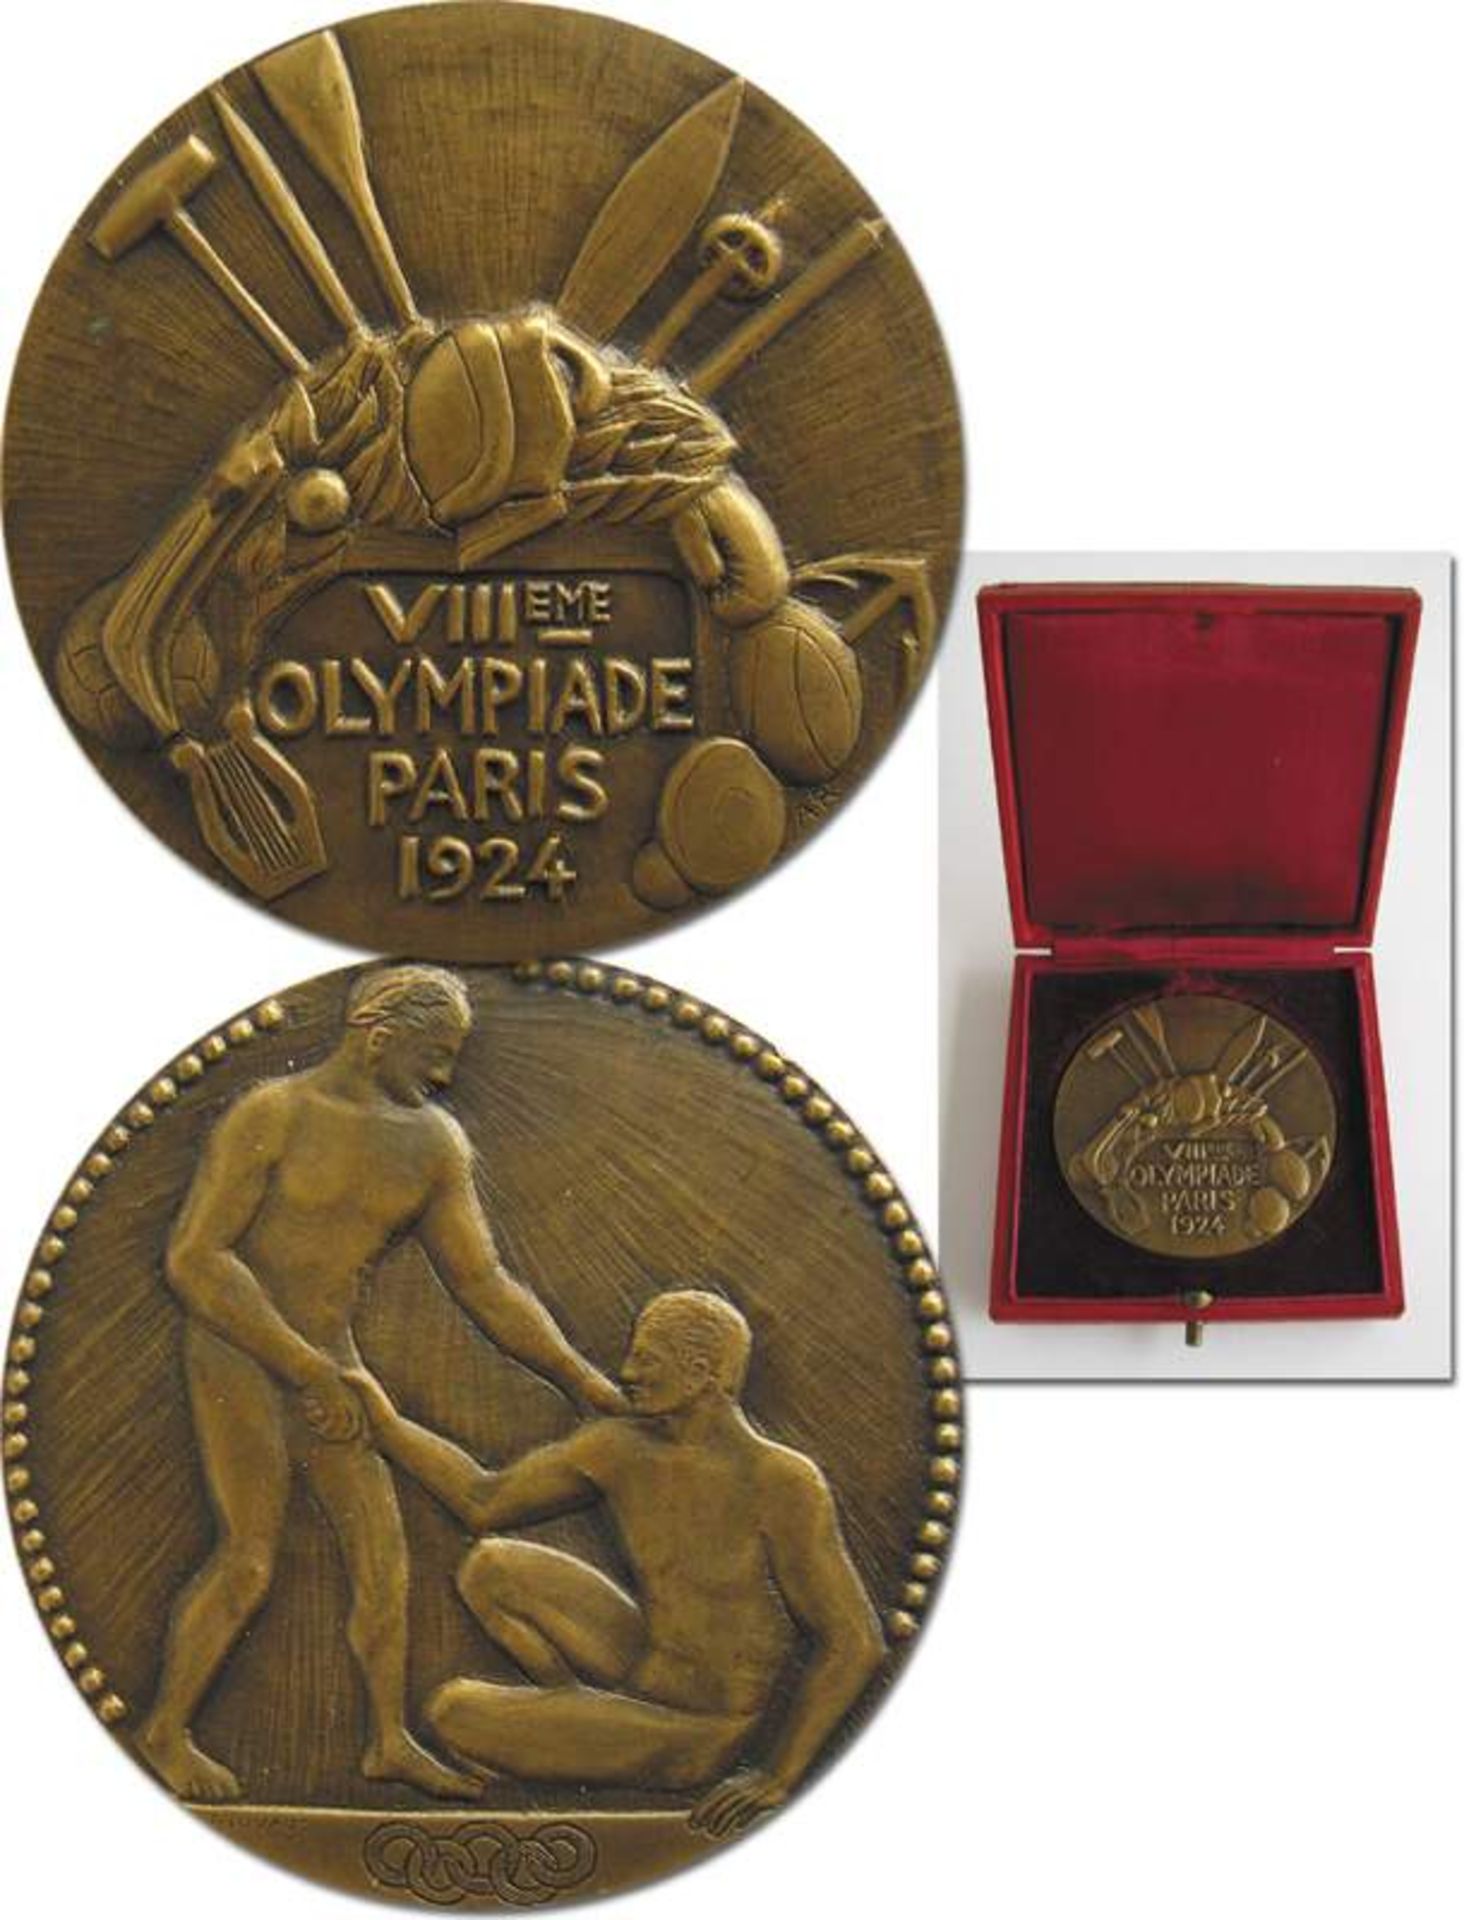 Olympic Games Paris 1924 Bronze Winner's Medal - for a 3rd place at the Olympics. Rim stamped "